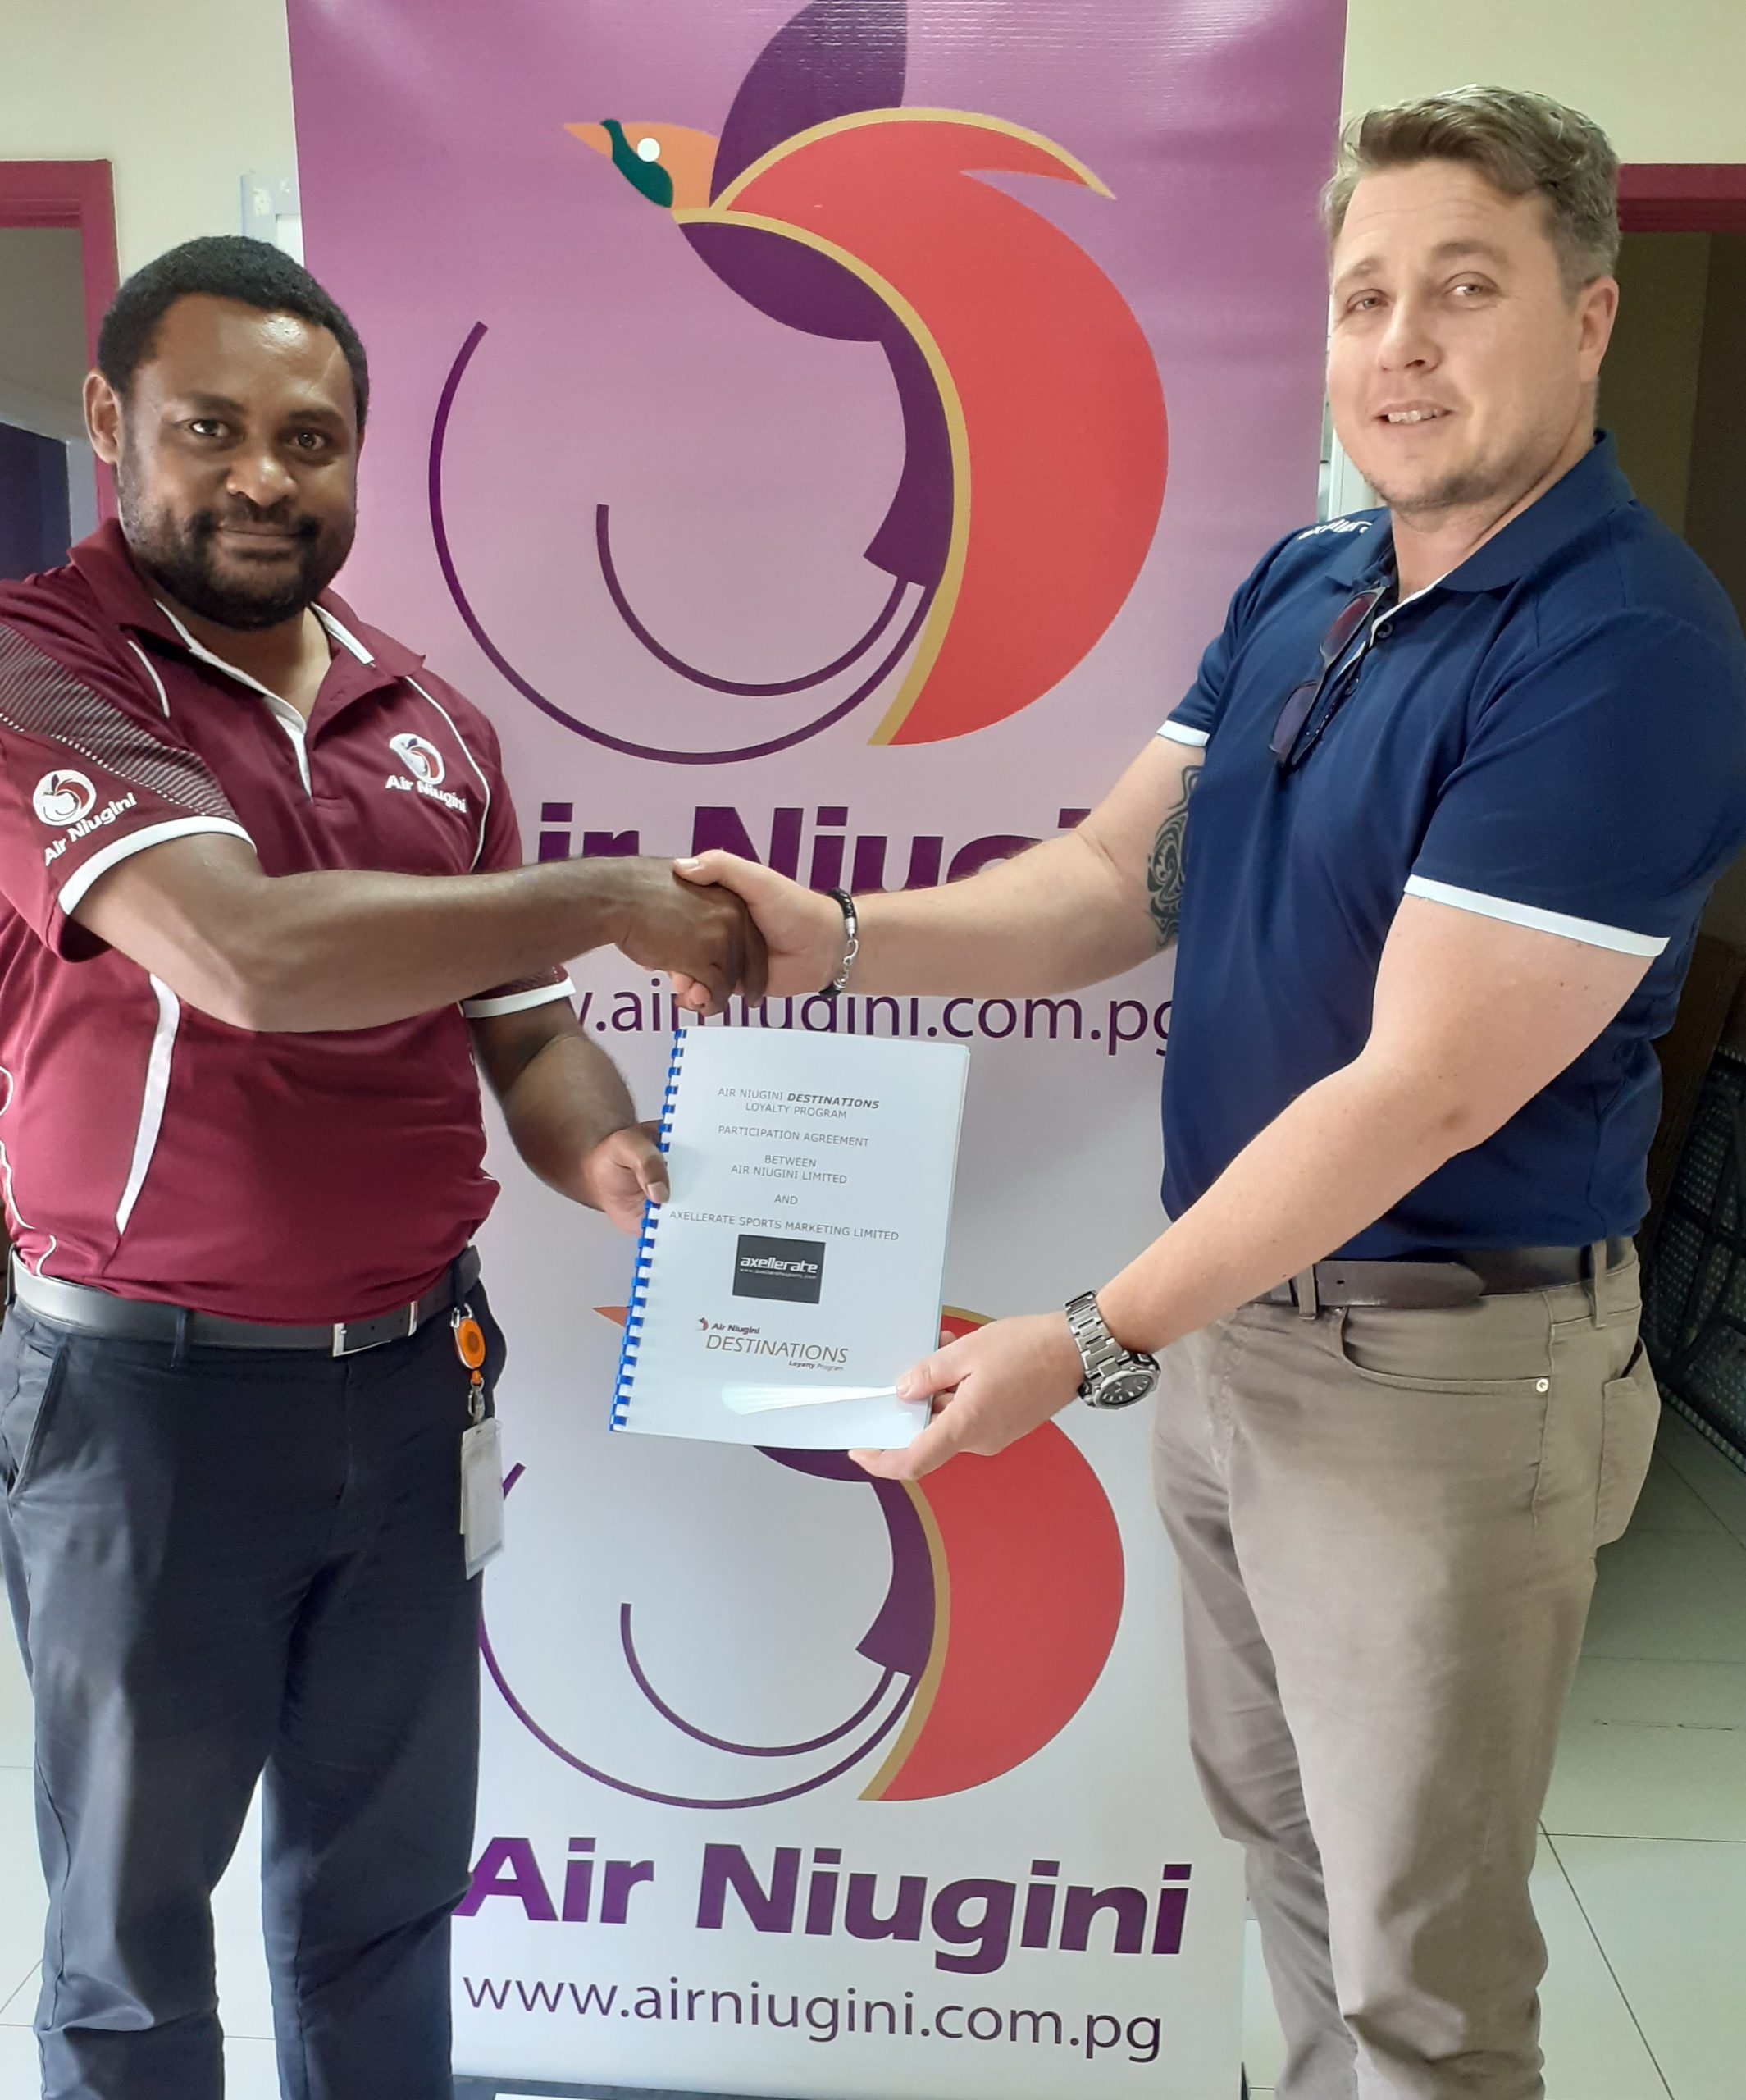 AIR NIUGINI DESTINATIONS WELCOMES BACK  AXELLERATE SPORTS AS PARTNER